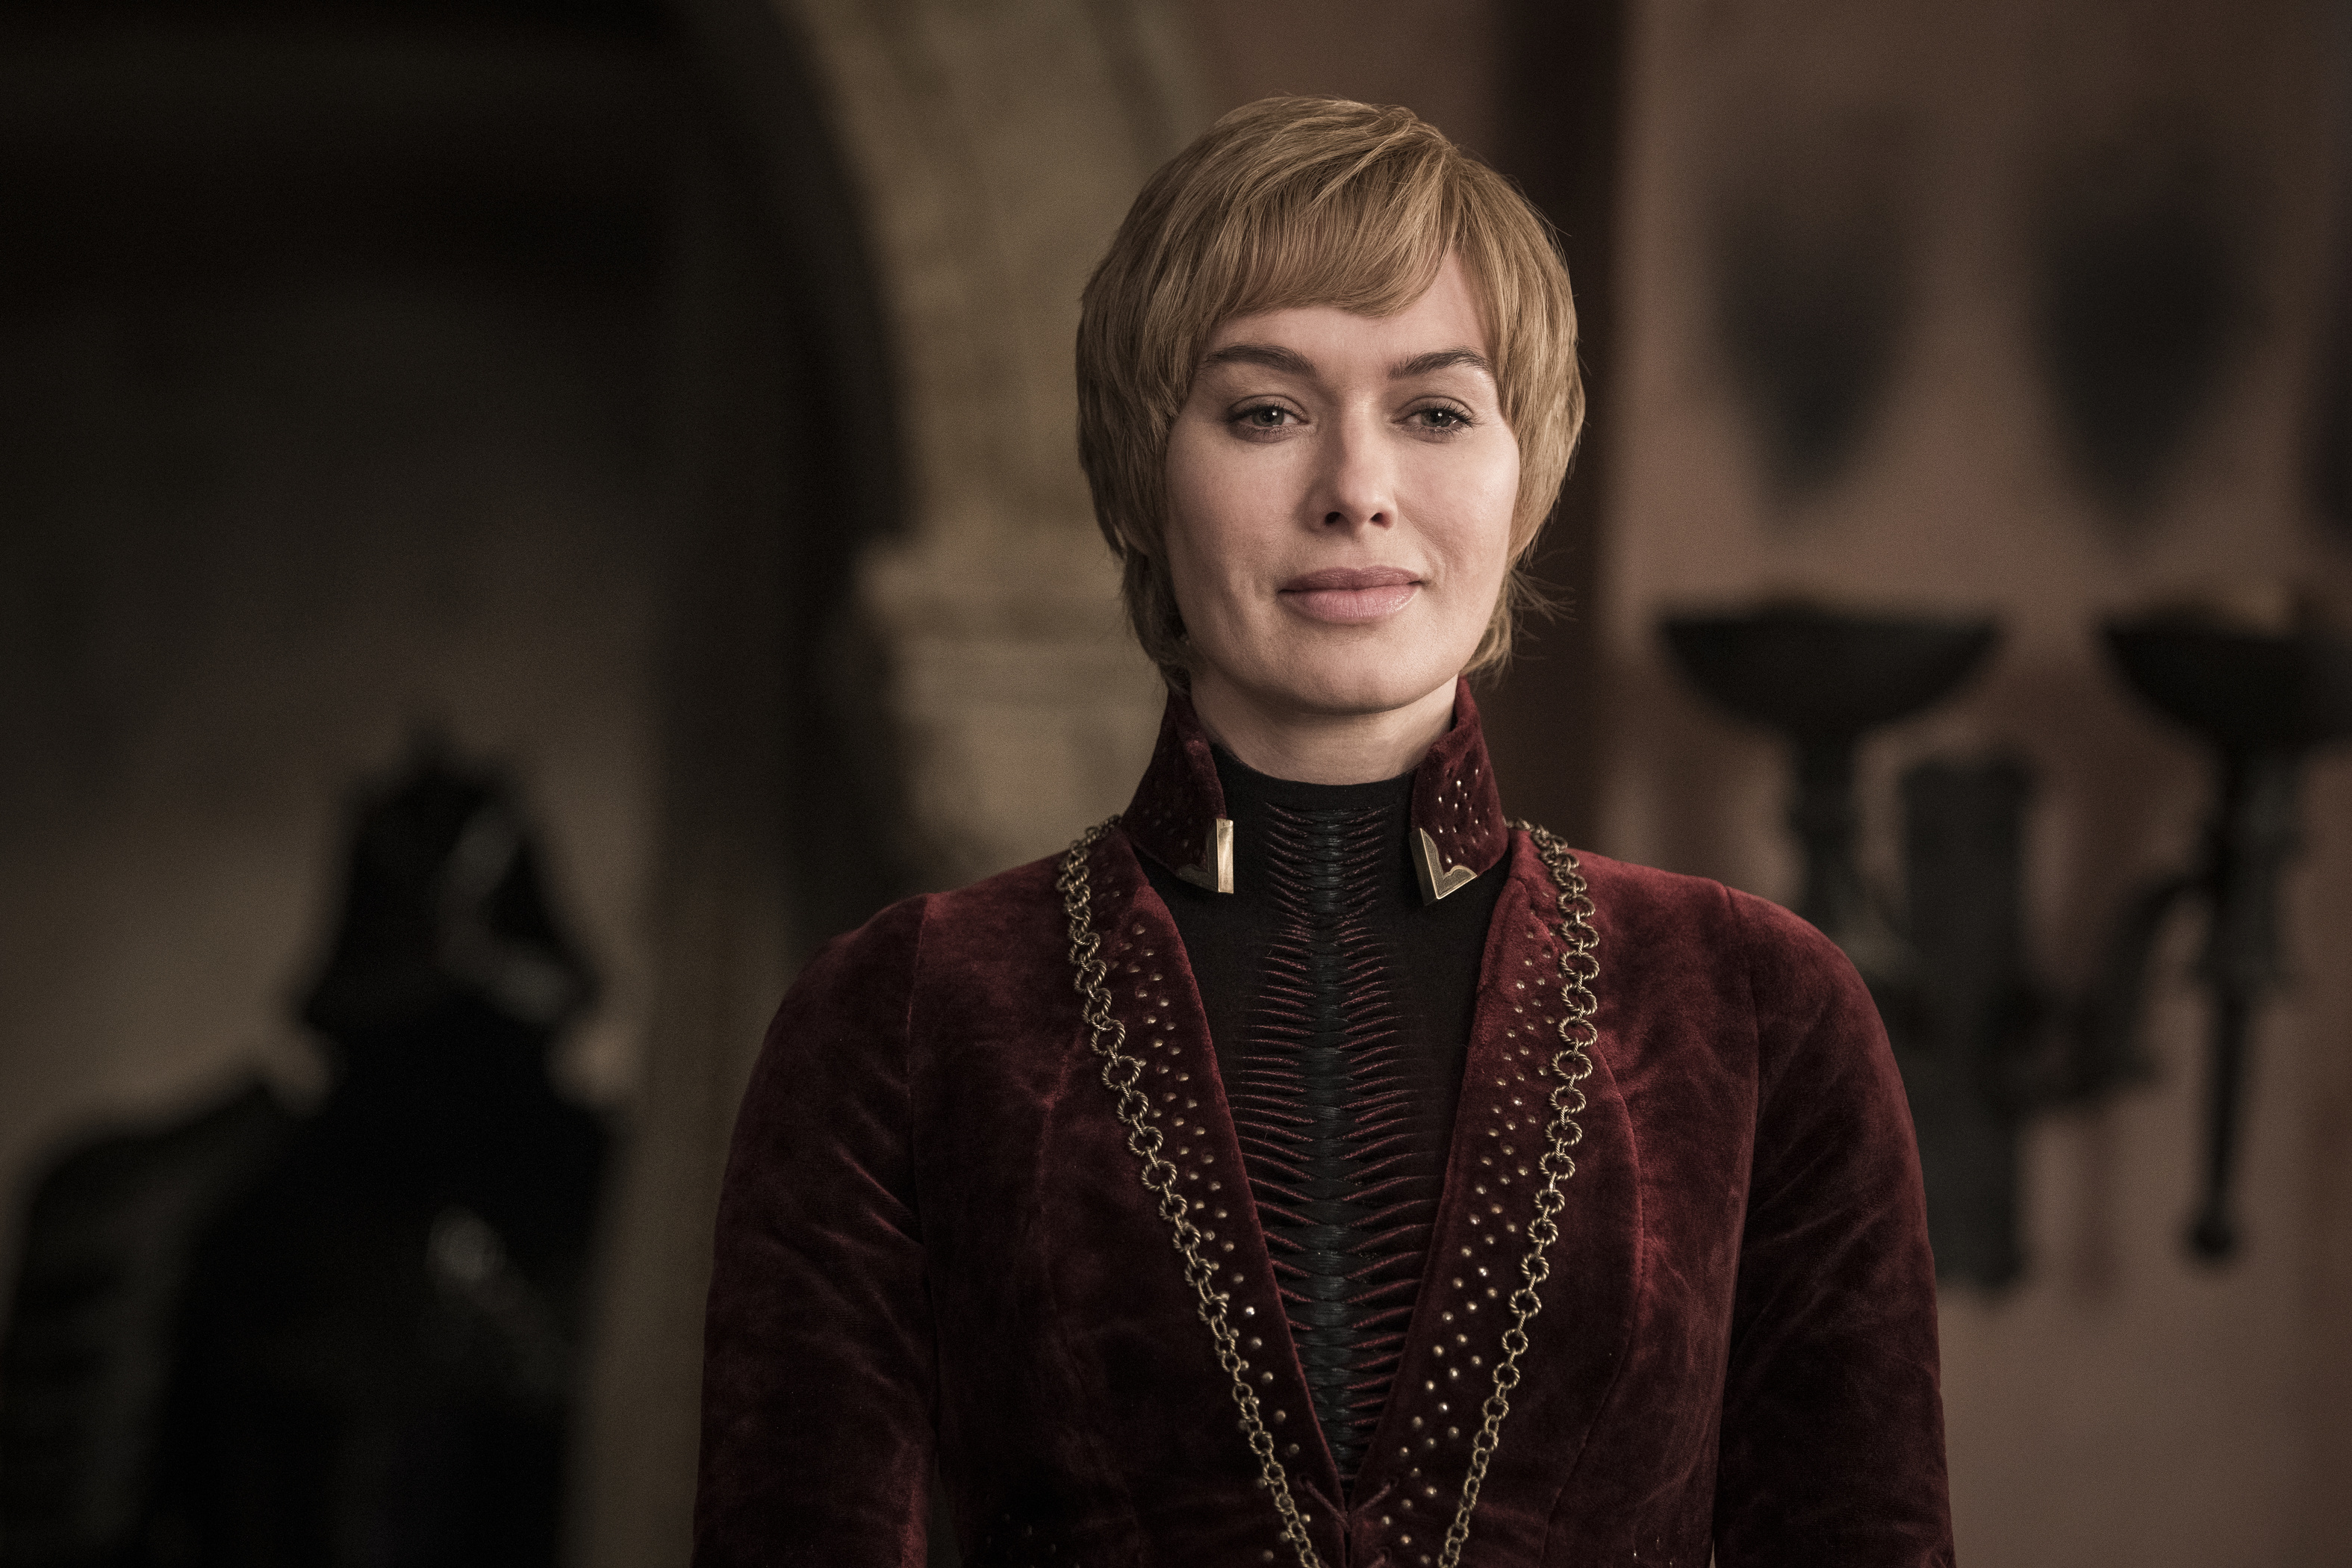 Cersi Lannister (Lena Headey) awaits the arrival of an enemy. Courtesy of HBO | Photo by Helen Sloan